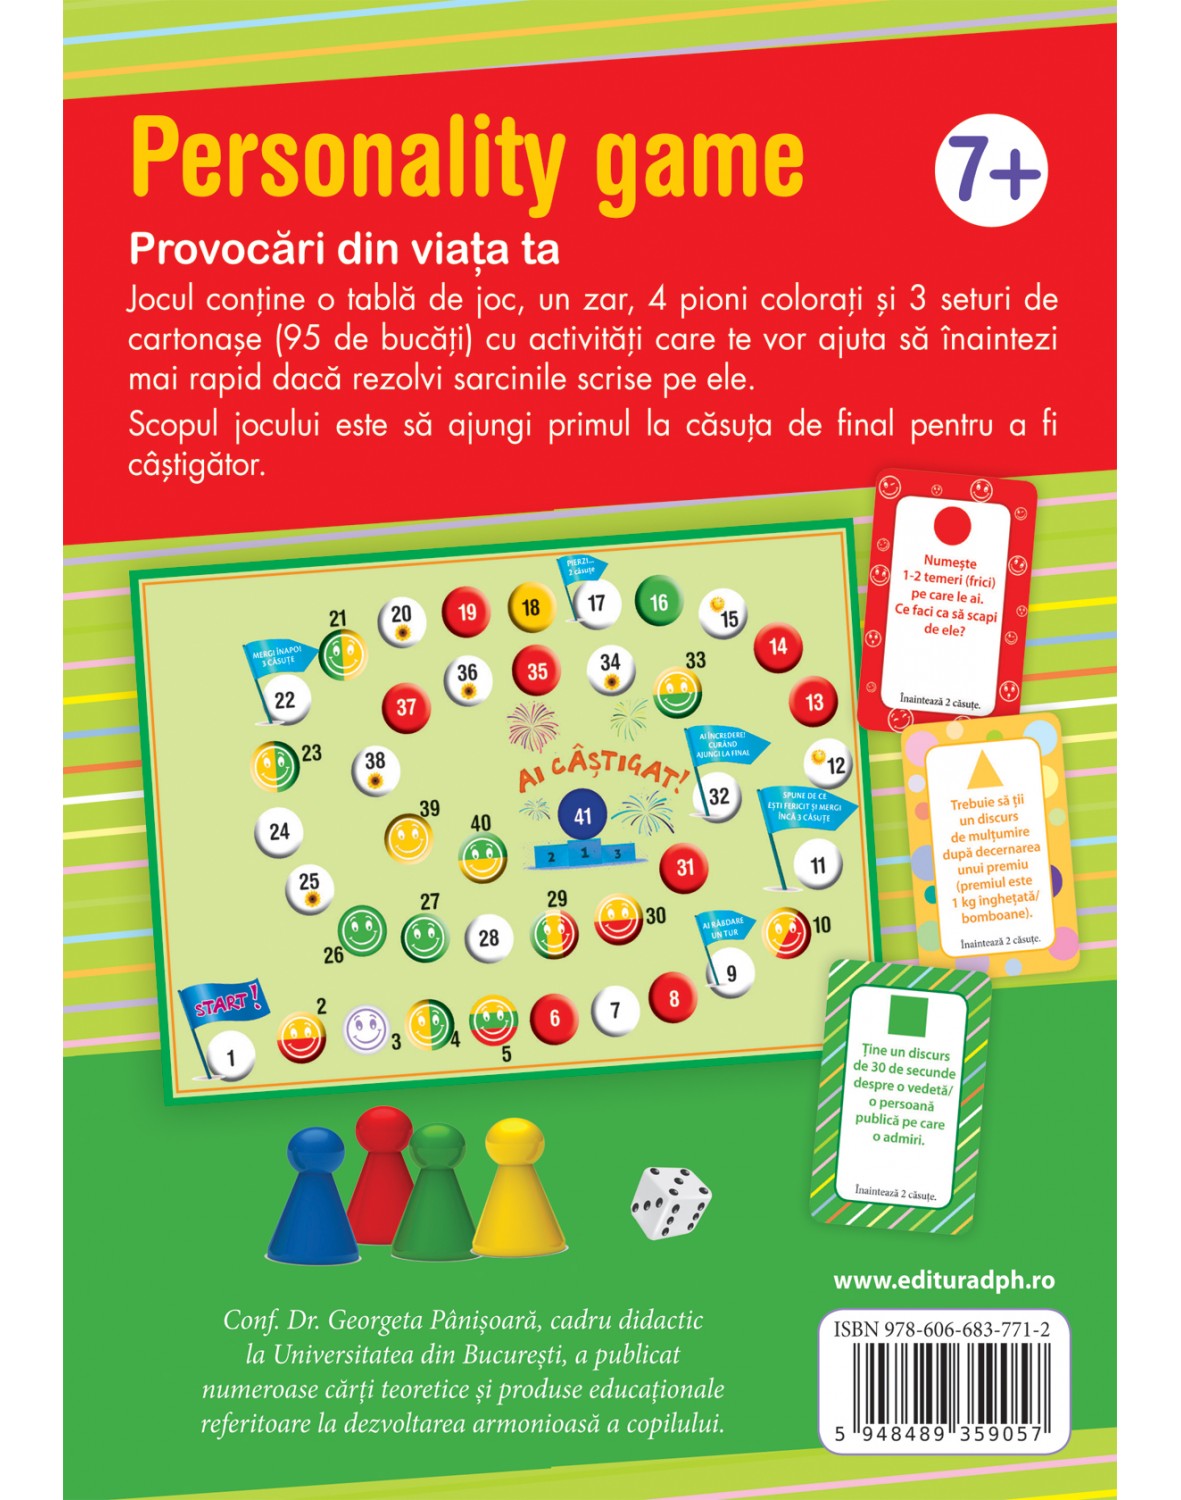 Personality game | Didactica Publishing House